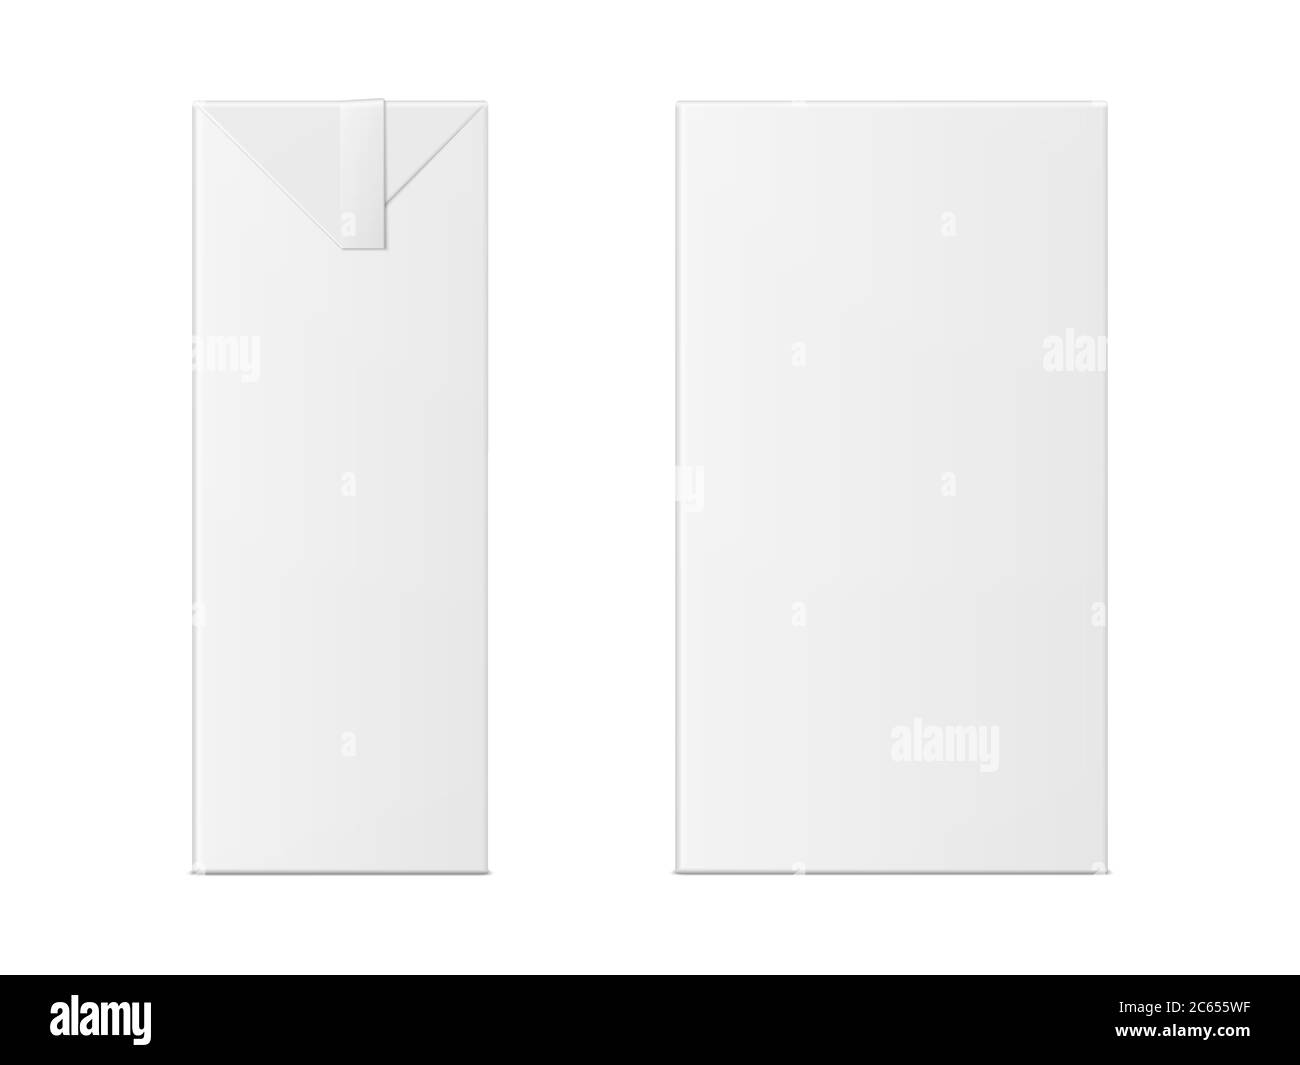 Vector 3d mock up of milk or juice box on white background. Realistic carton one liter package isolated. Template for your design. Front view. Stock Vector